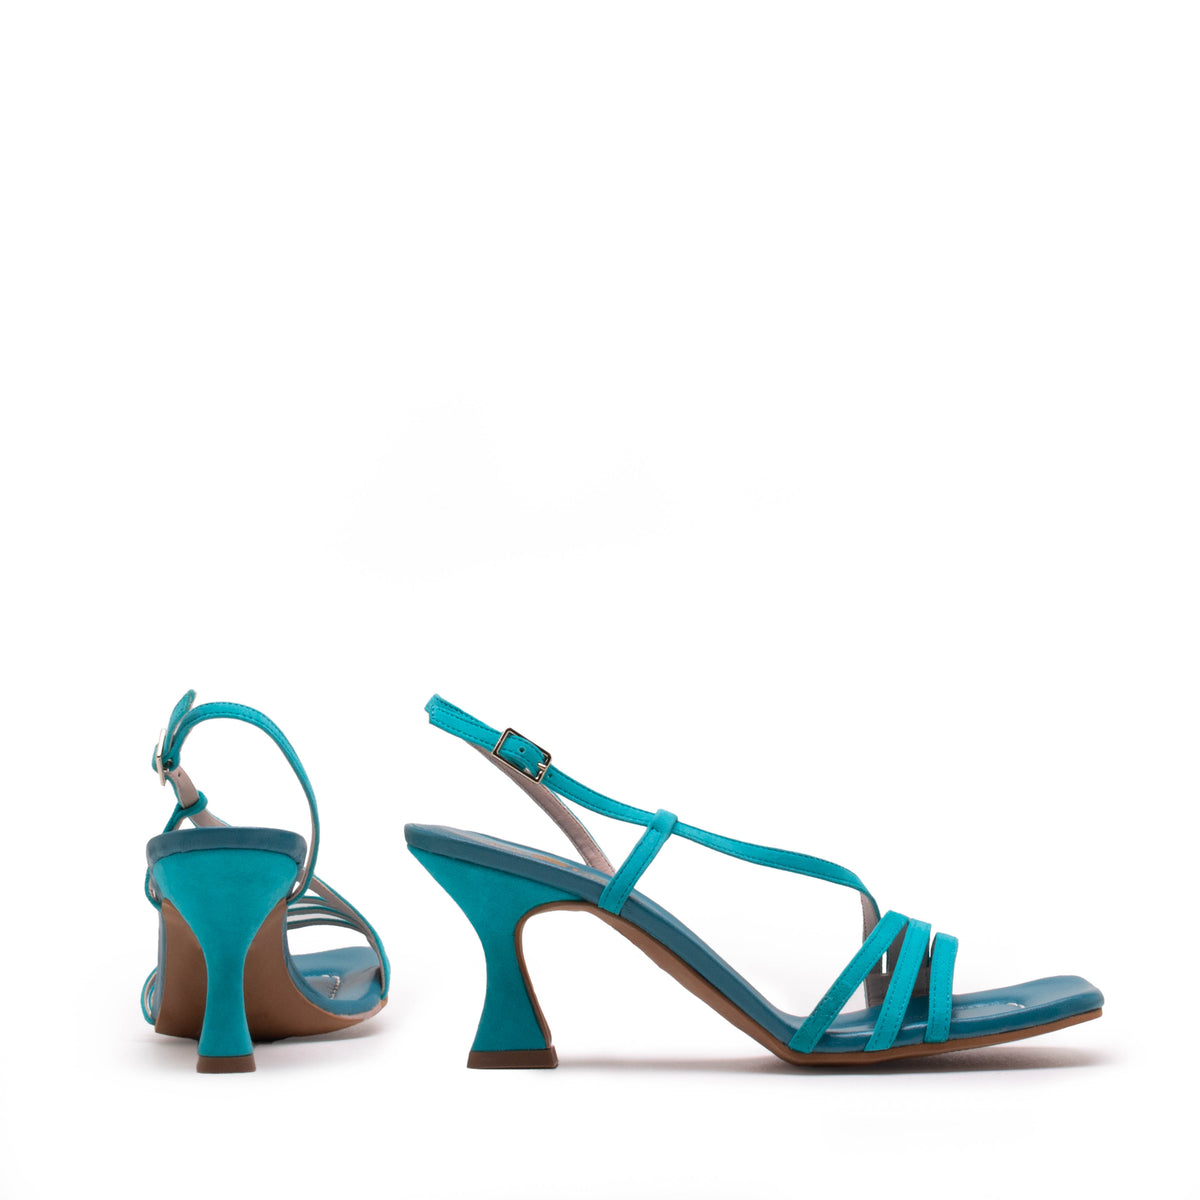 POLLY SANDALS